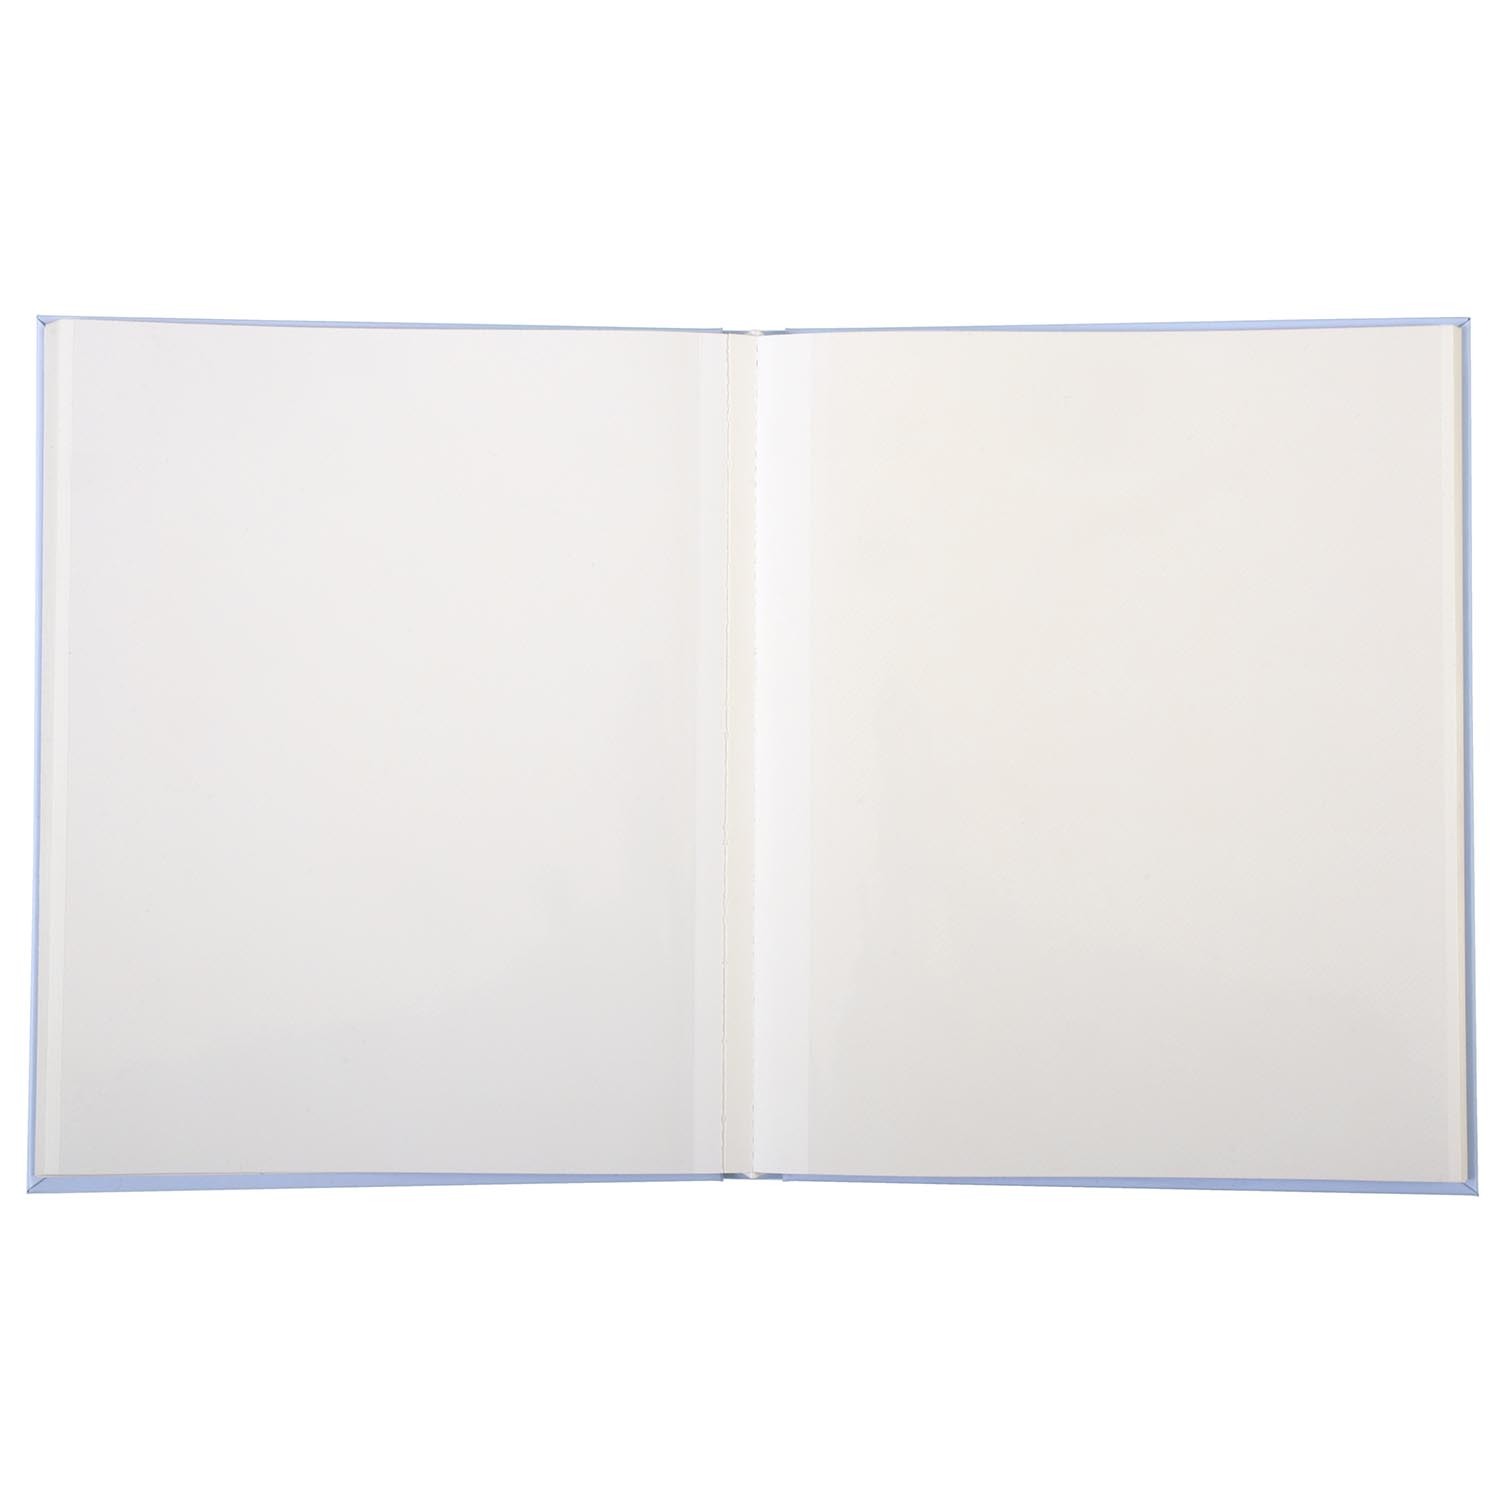 Single Pastel Photo Album 50 Pages in Assorted styles Image 5